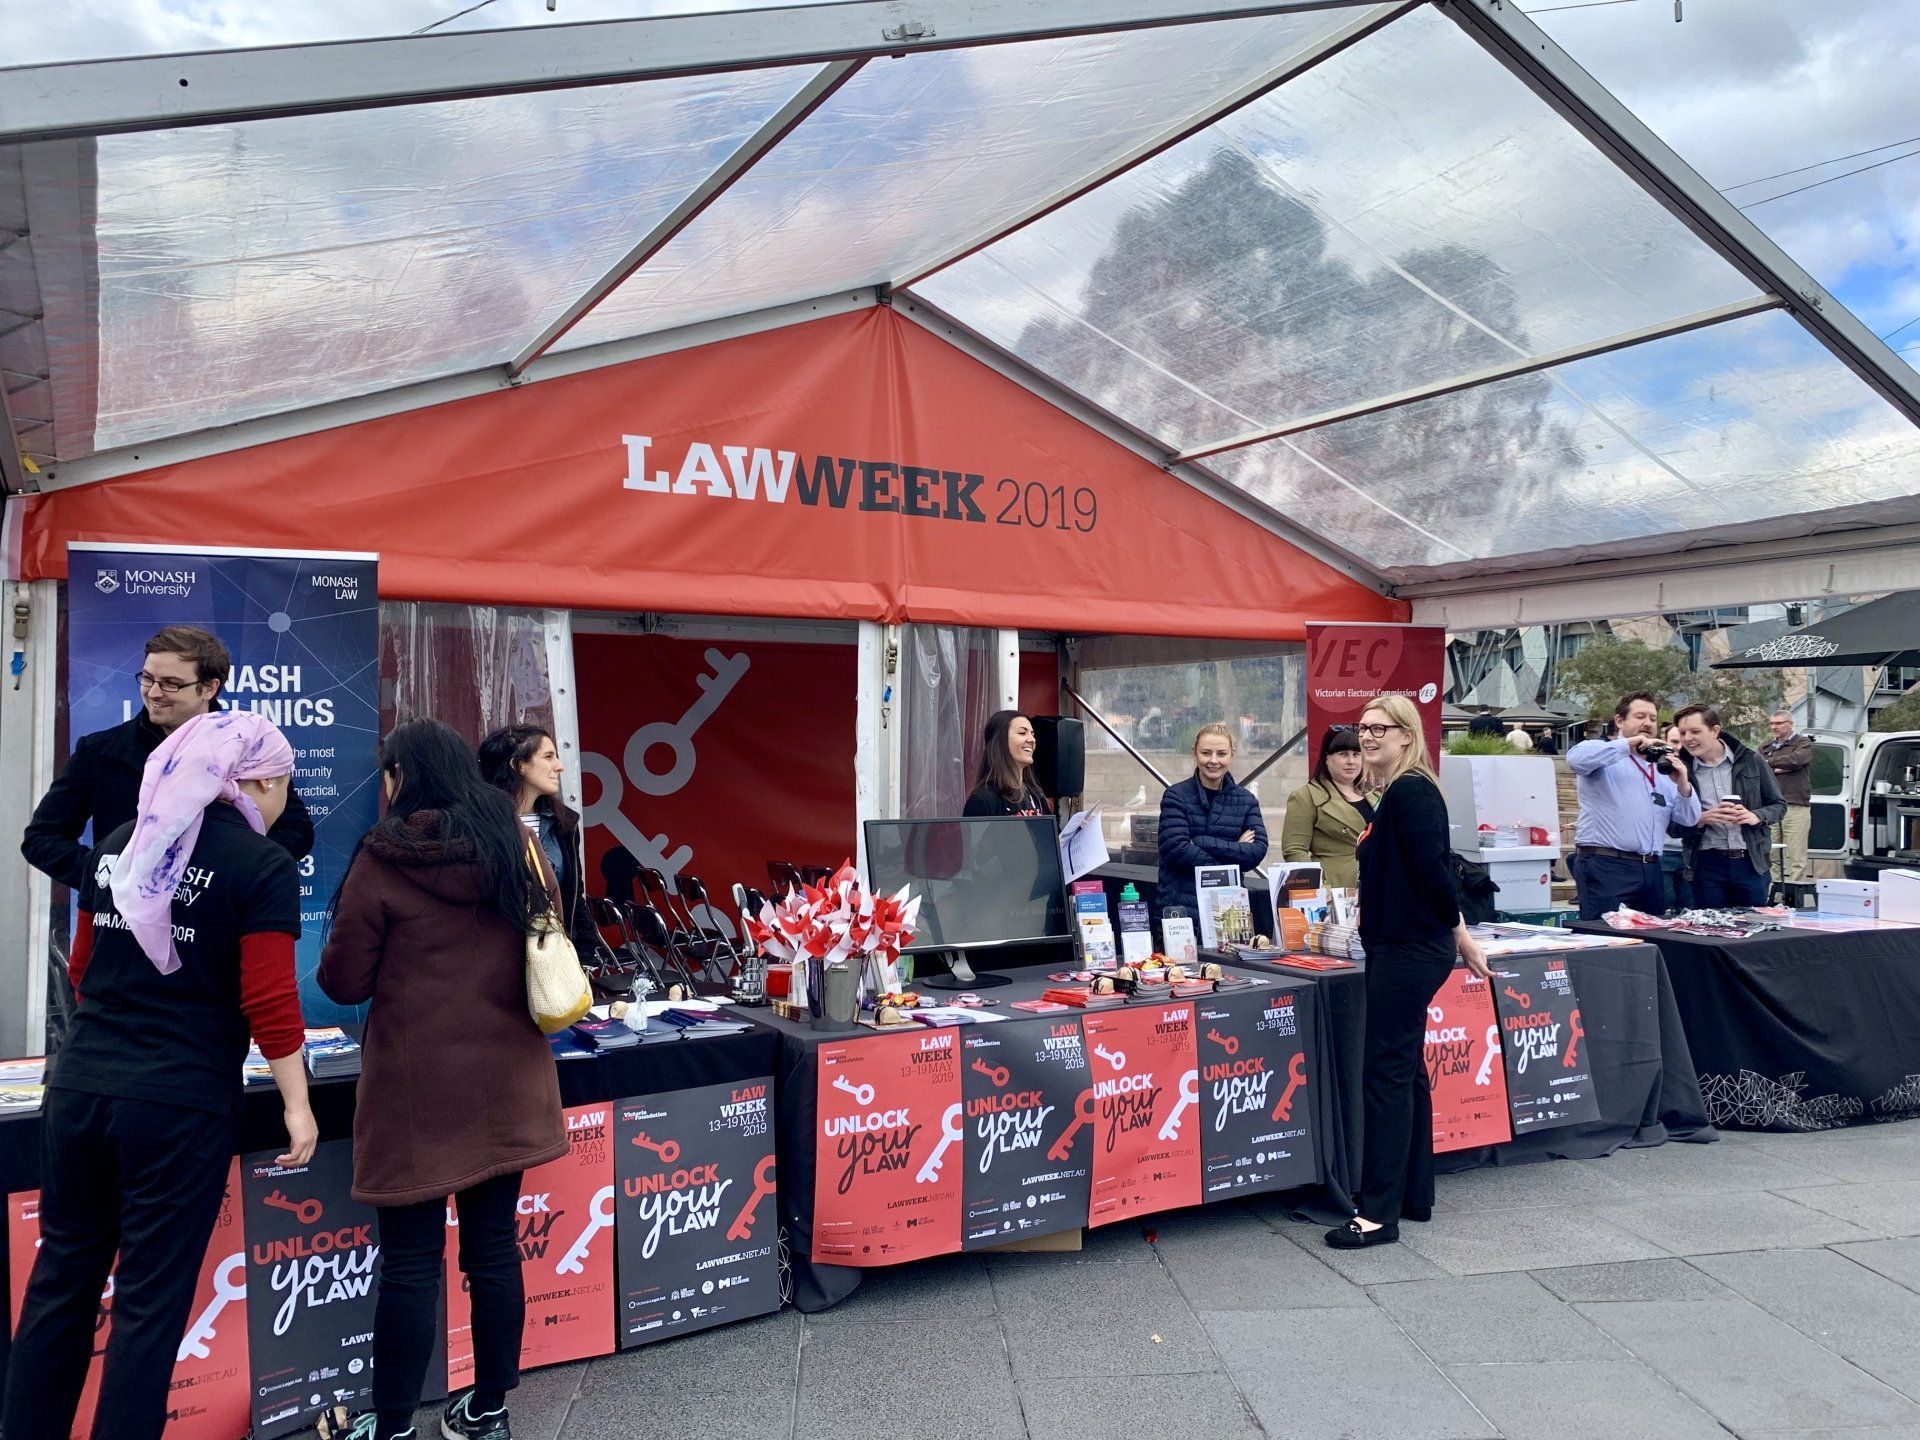 Forty Four Degrees at Law Week